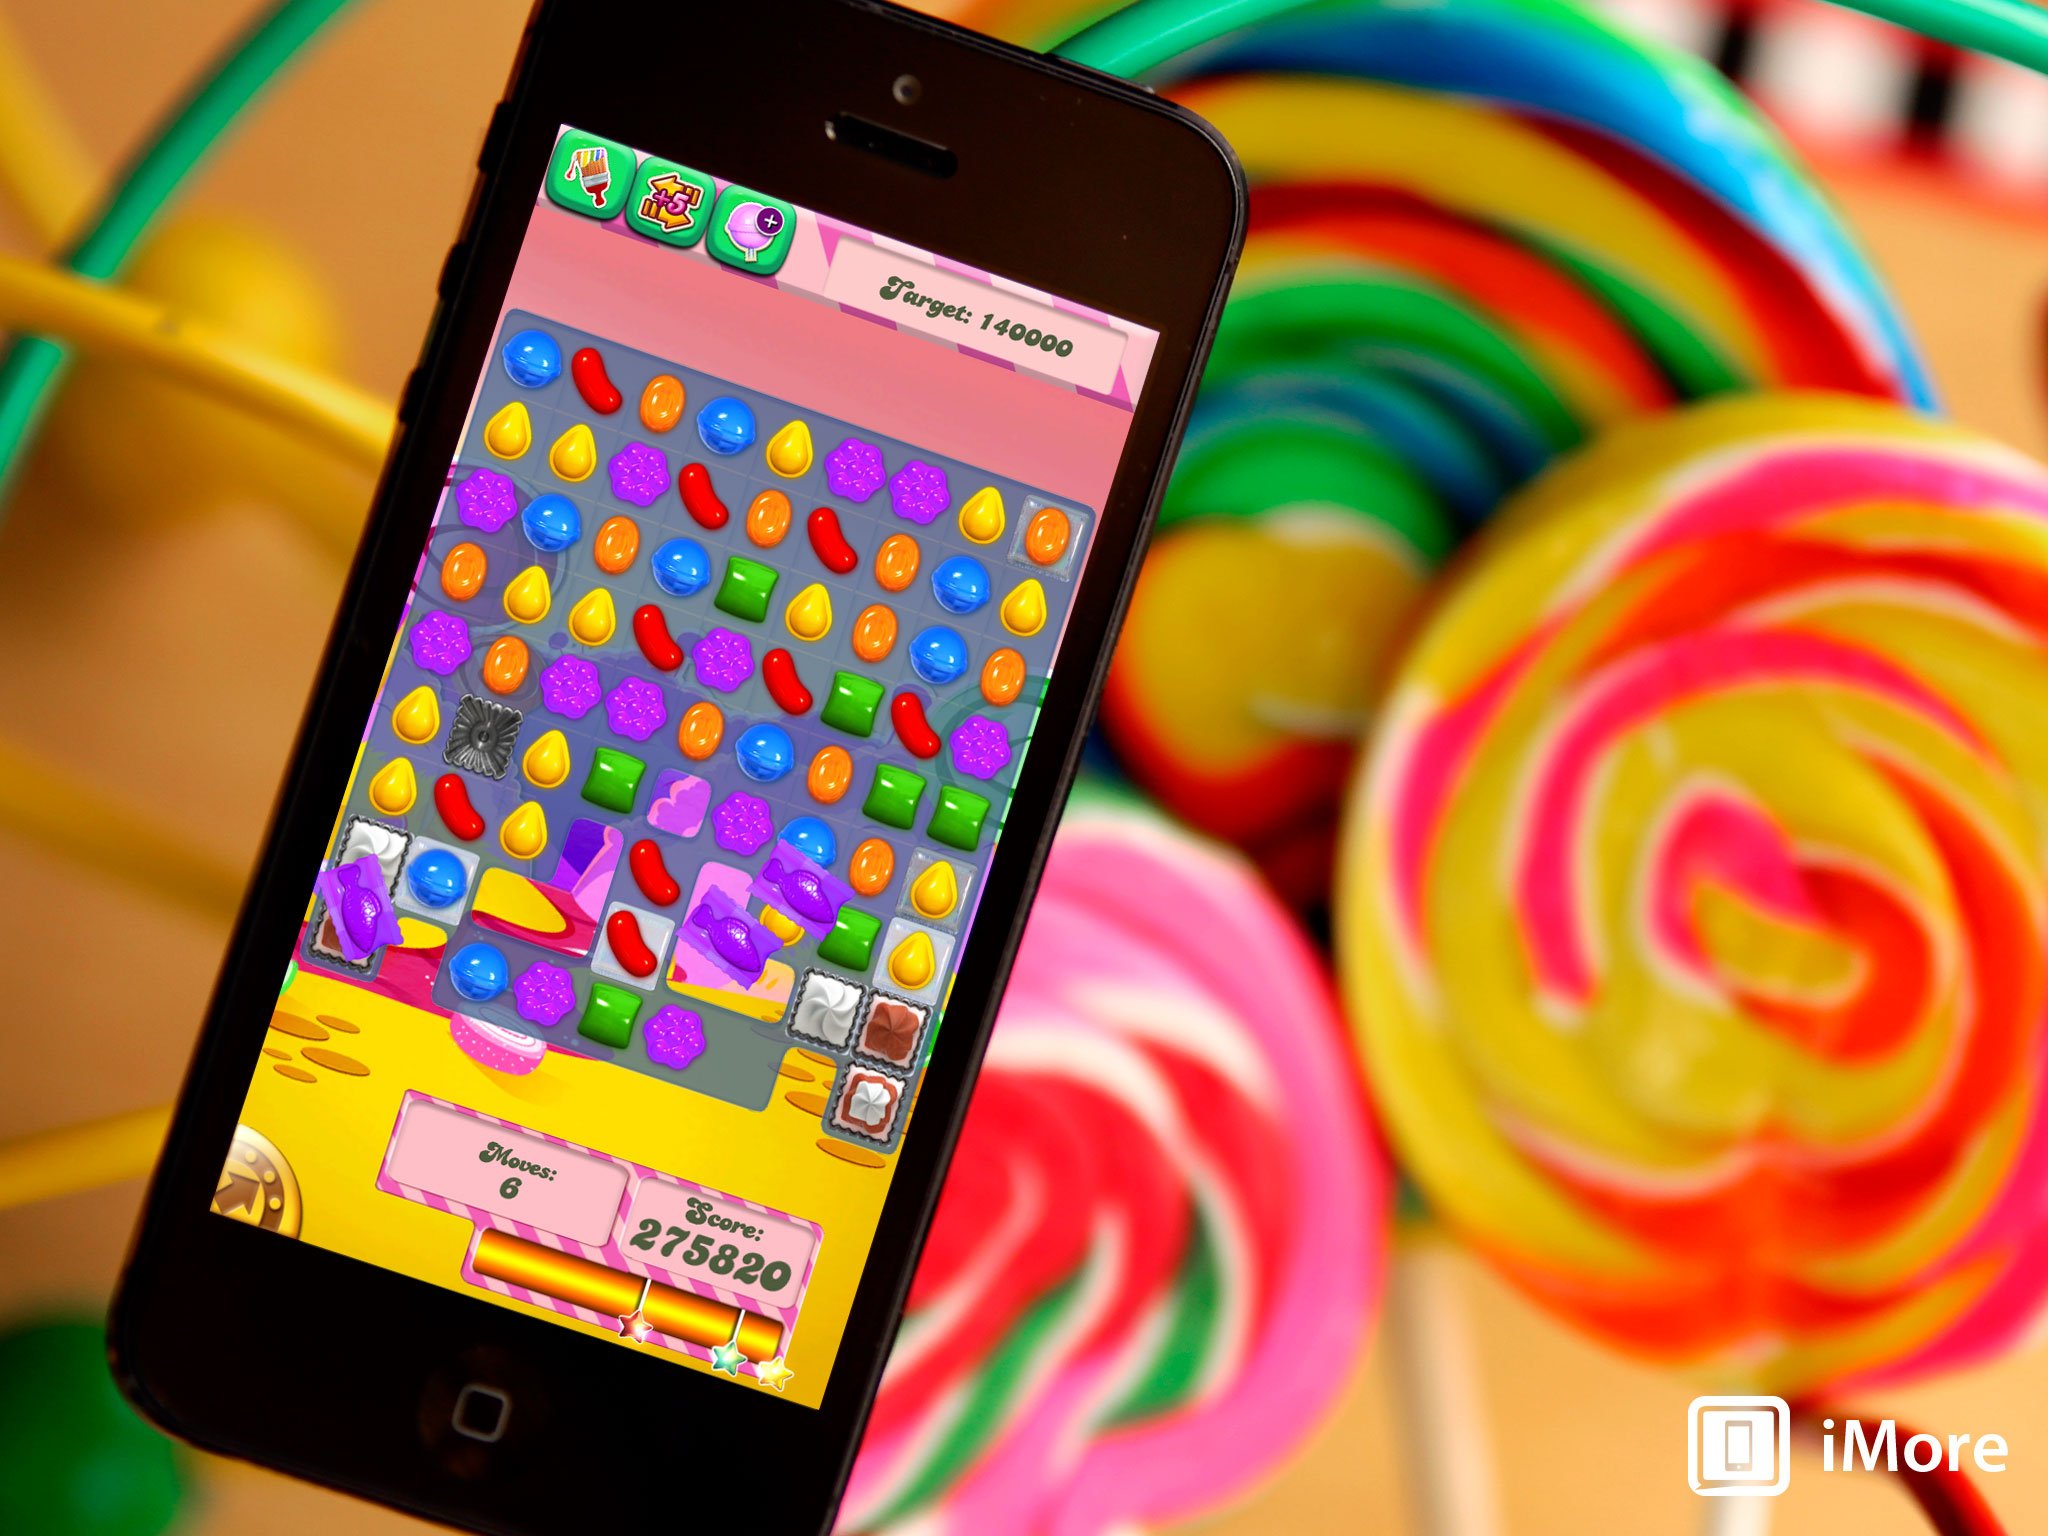 Candy Crush: Top 20 tips, tricks, and cheats to pass levels and get lives!